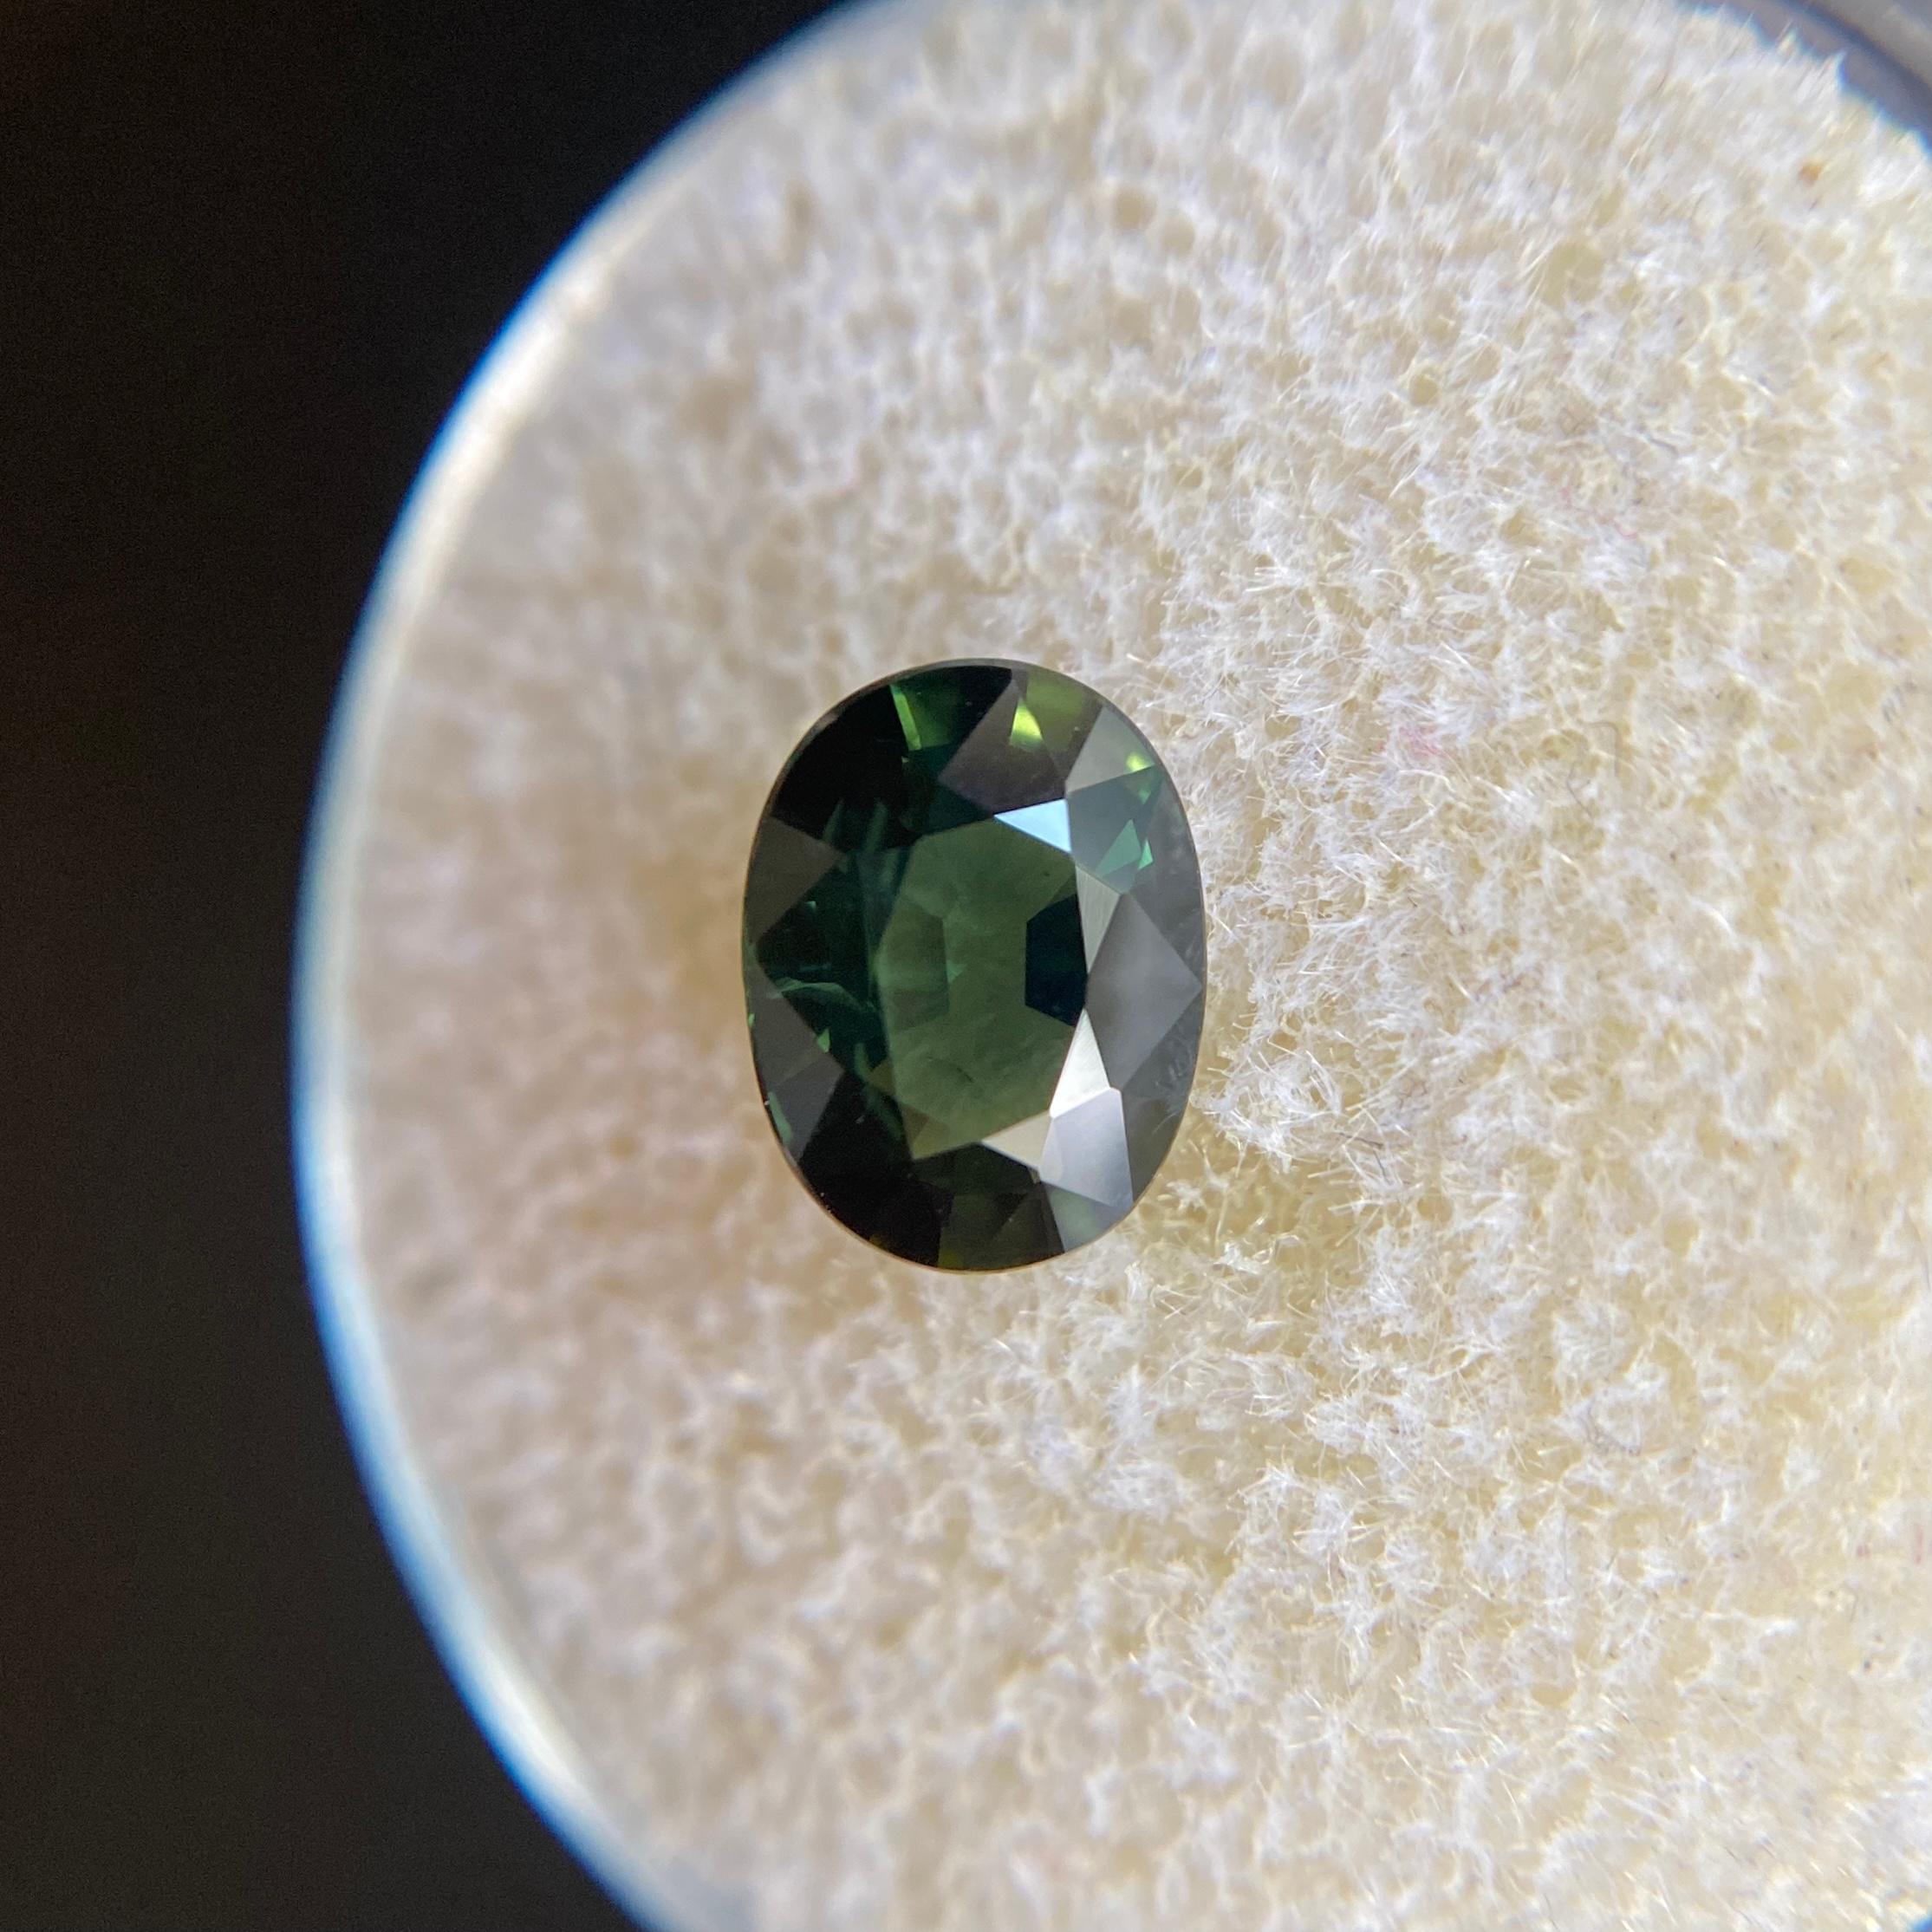 Natural Green Sapphire Gemstone.

1.34 Carat with a beautiful and deep green colour and very good clarity, clean stone with only some small natural inclusions visible when looking closely.

Also has an excellent oval cut and ideal polish to show